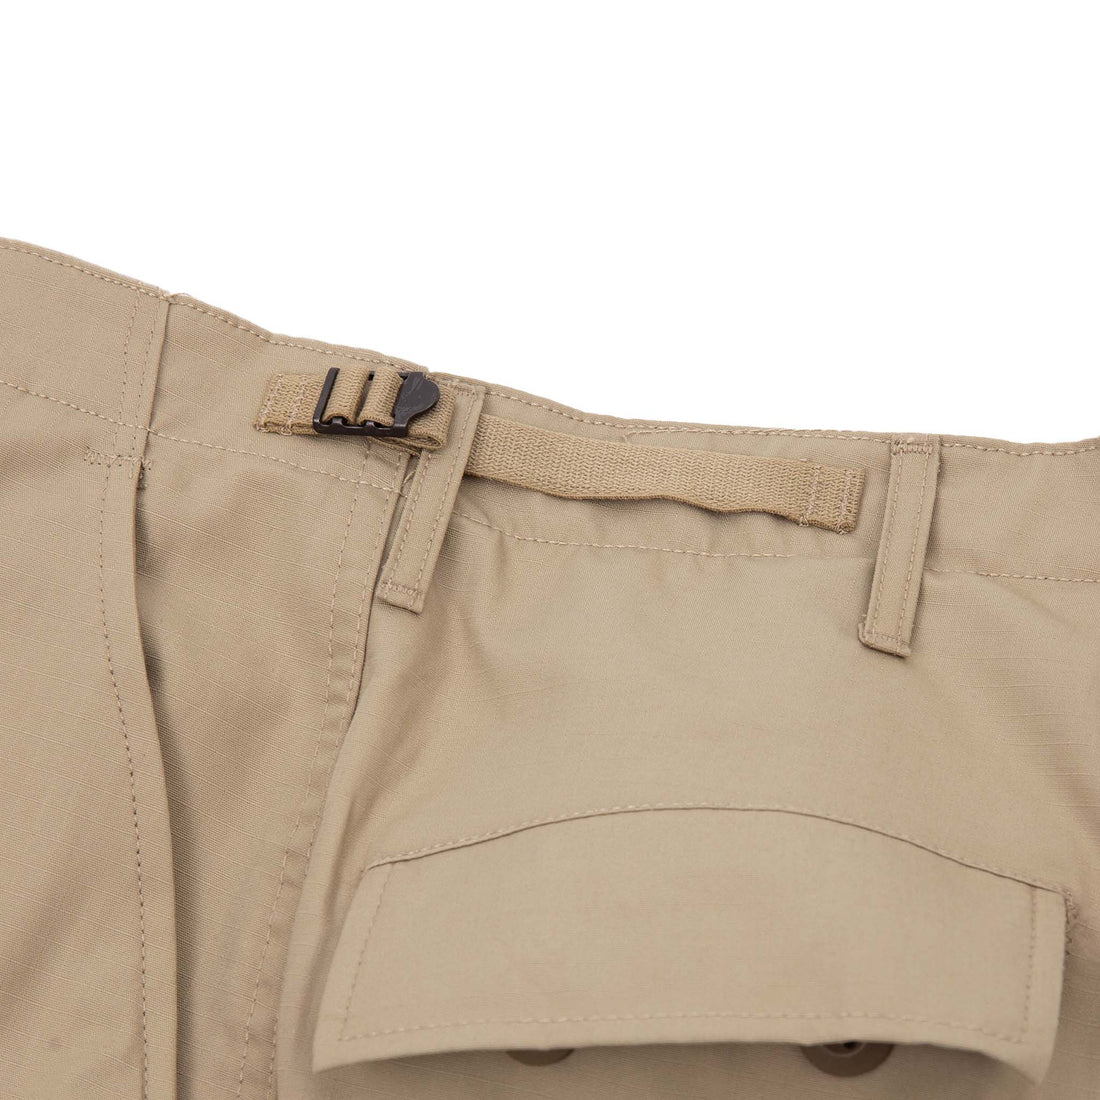 PROPPER Cargo Shorts are lightweight and breathable, they provide maximum durability in classic style with all the functional details you need. The perfect Ripstop BDU Shorts for warmer days. Propper is a manufacturer of clothing and gear for tactical, law enforcement, public safety, and military applications. Since 1967 it has been one of the main uniform suppliers to the United States military. ROSYTH TERRACE Authorized Distributor of PROPPER Singapore.